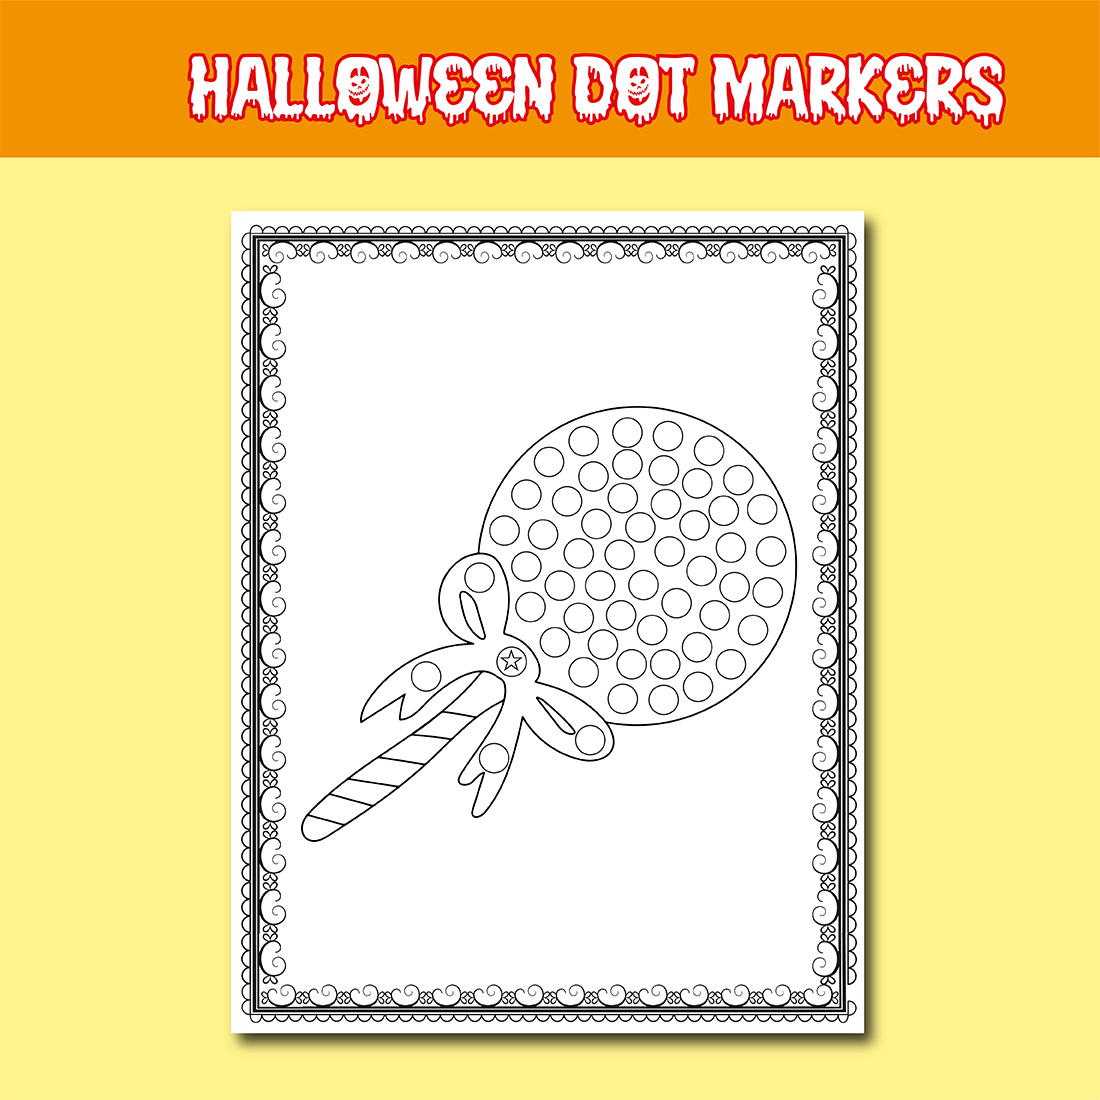 20 Pages Halloween Dot Markers Activity Book.